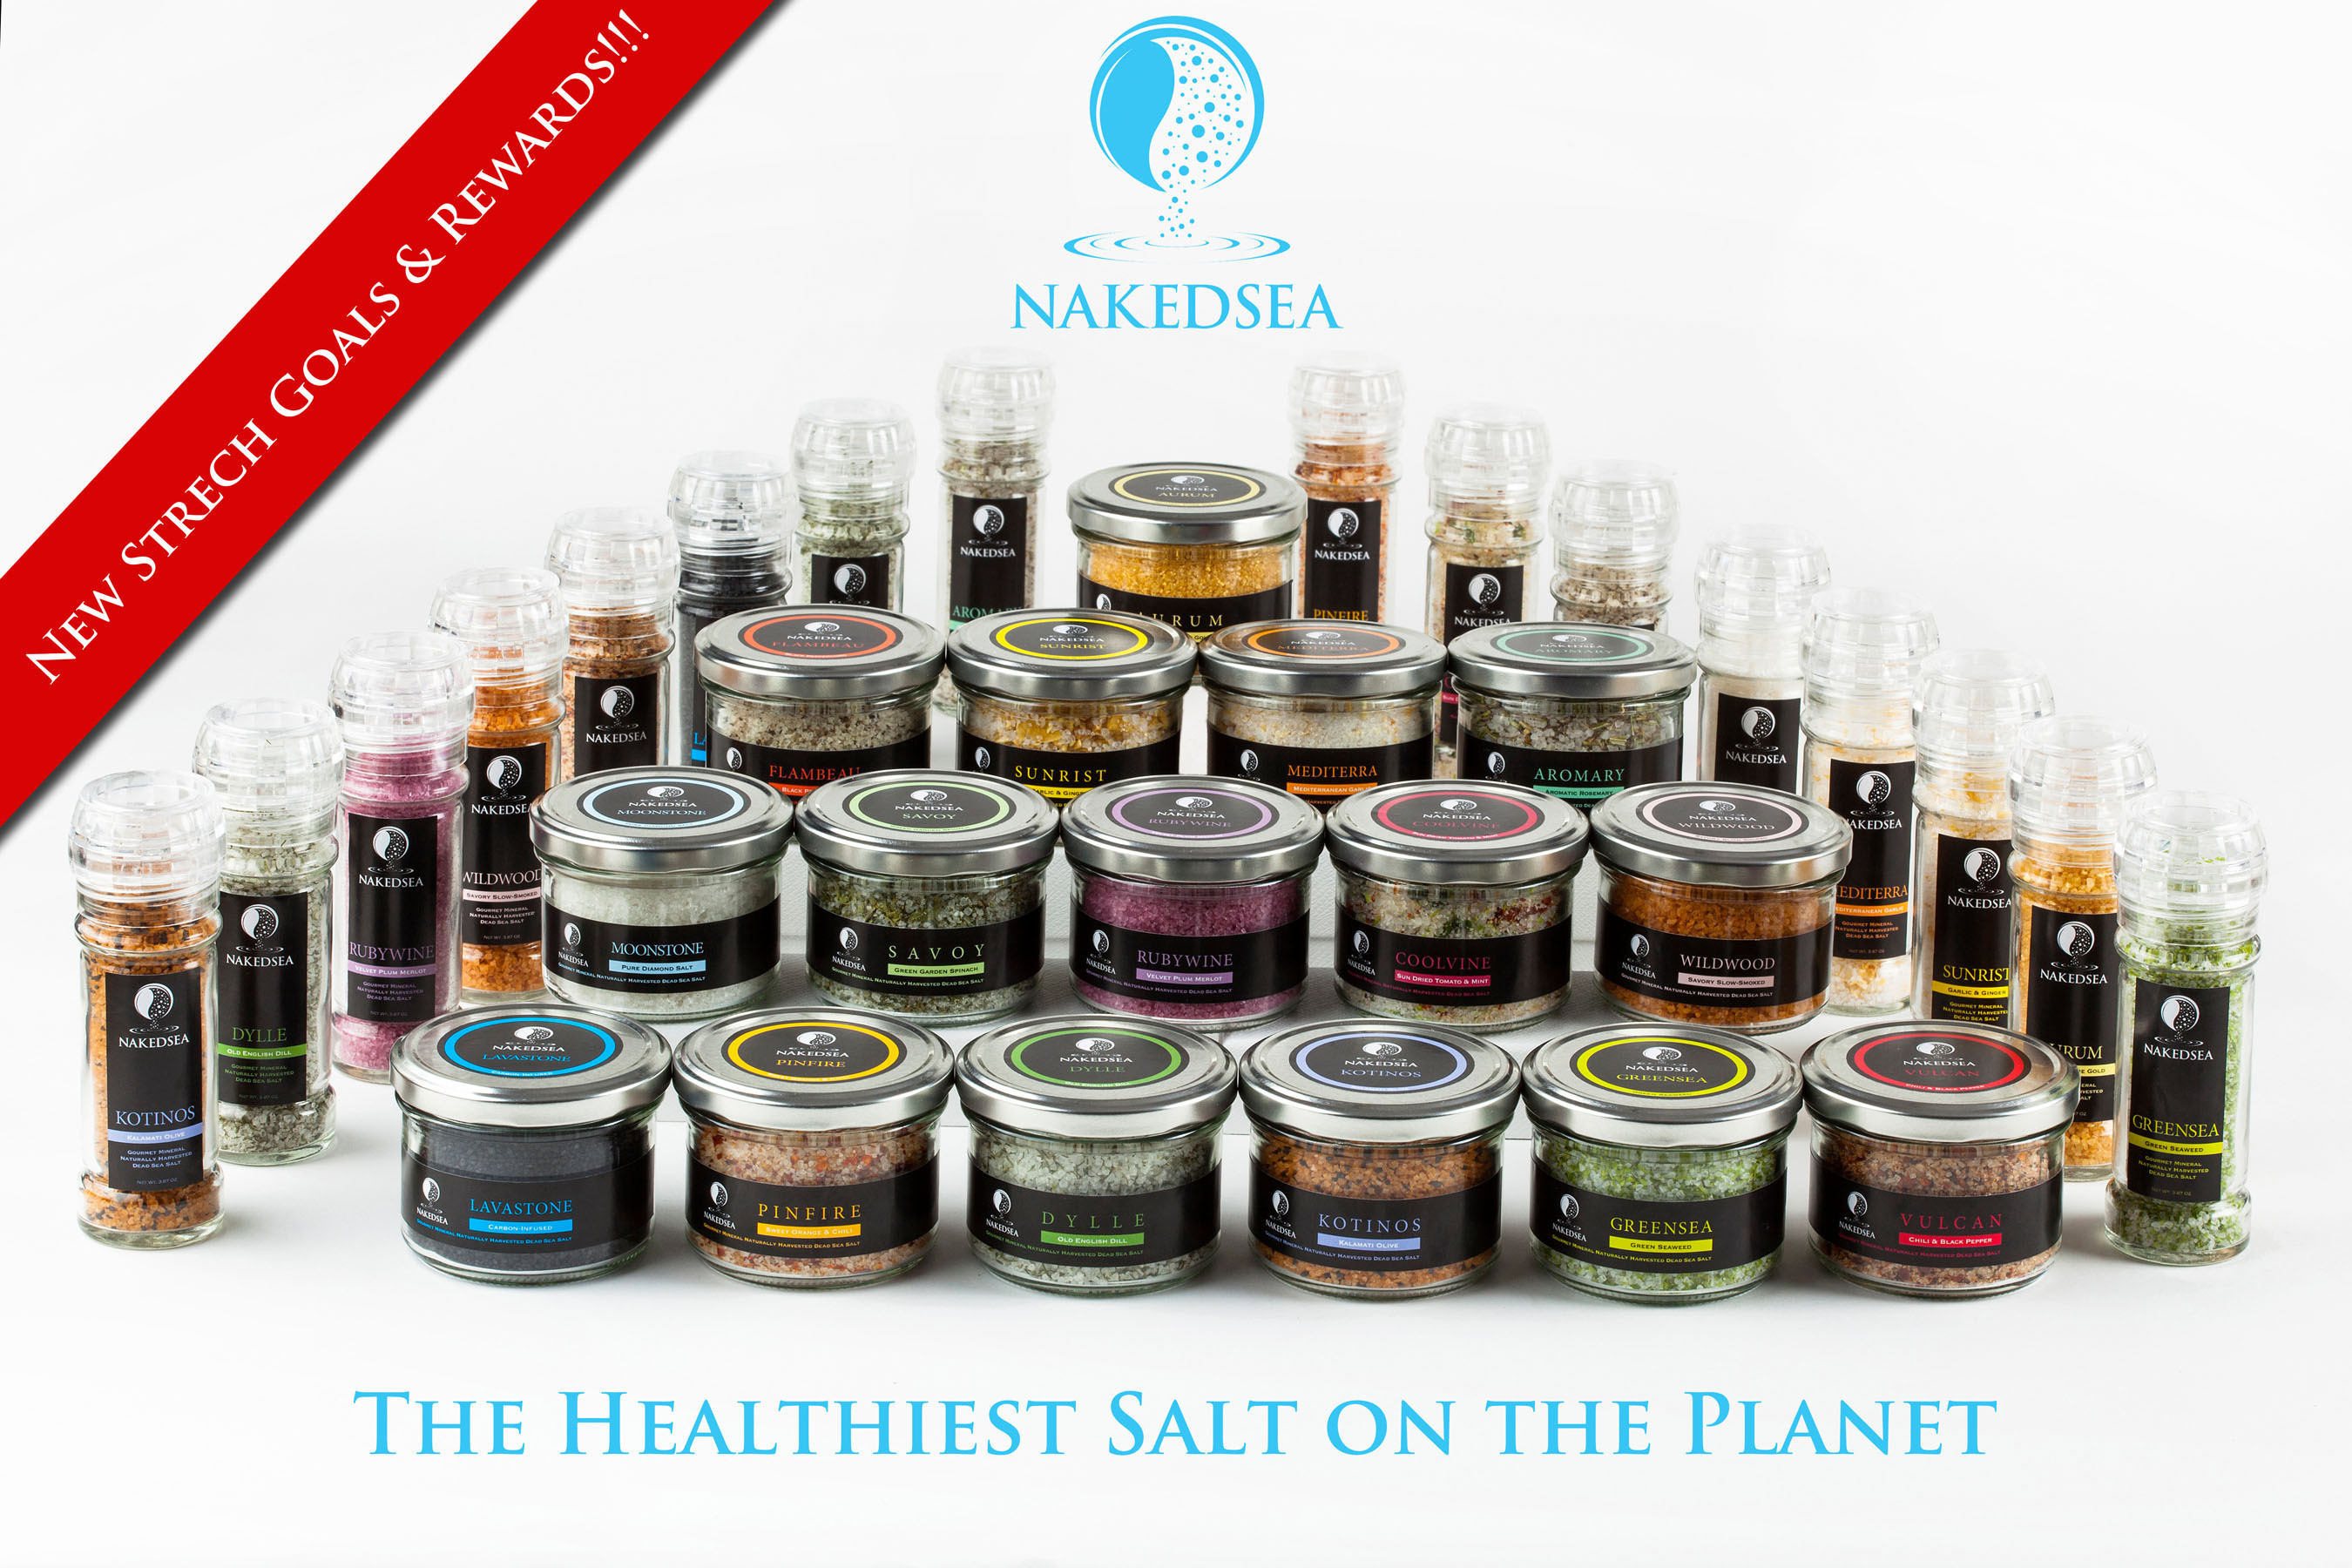 New Stretch Goals and Rewards from Naked Sea Salt. (PRNewsFoto/Naked Sea Salt) (PRNewsFoto/NAKED SEA SALT)